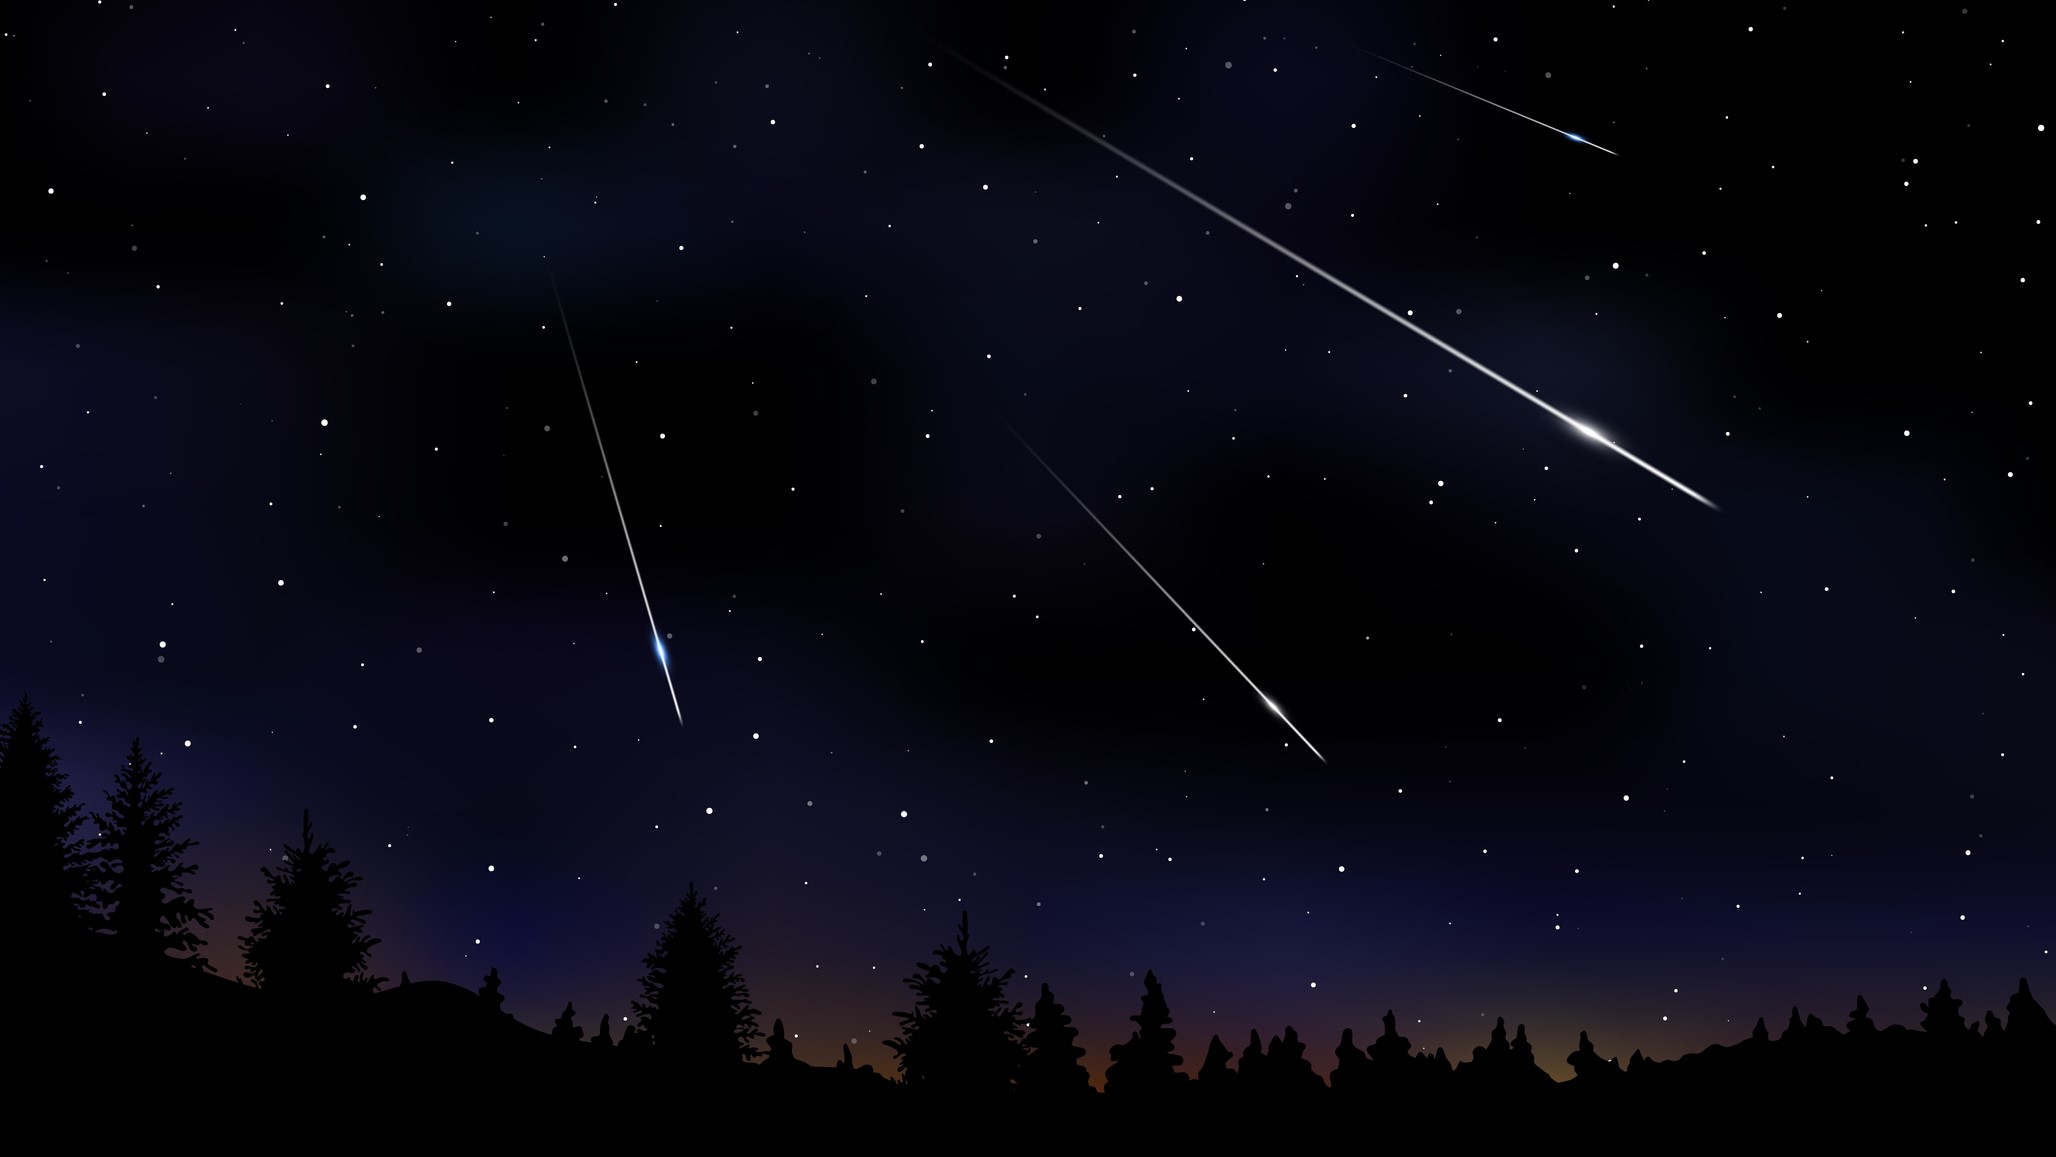 Want to see the potential tau Herculids meteor shower? Here's what to expect, according to NASA.